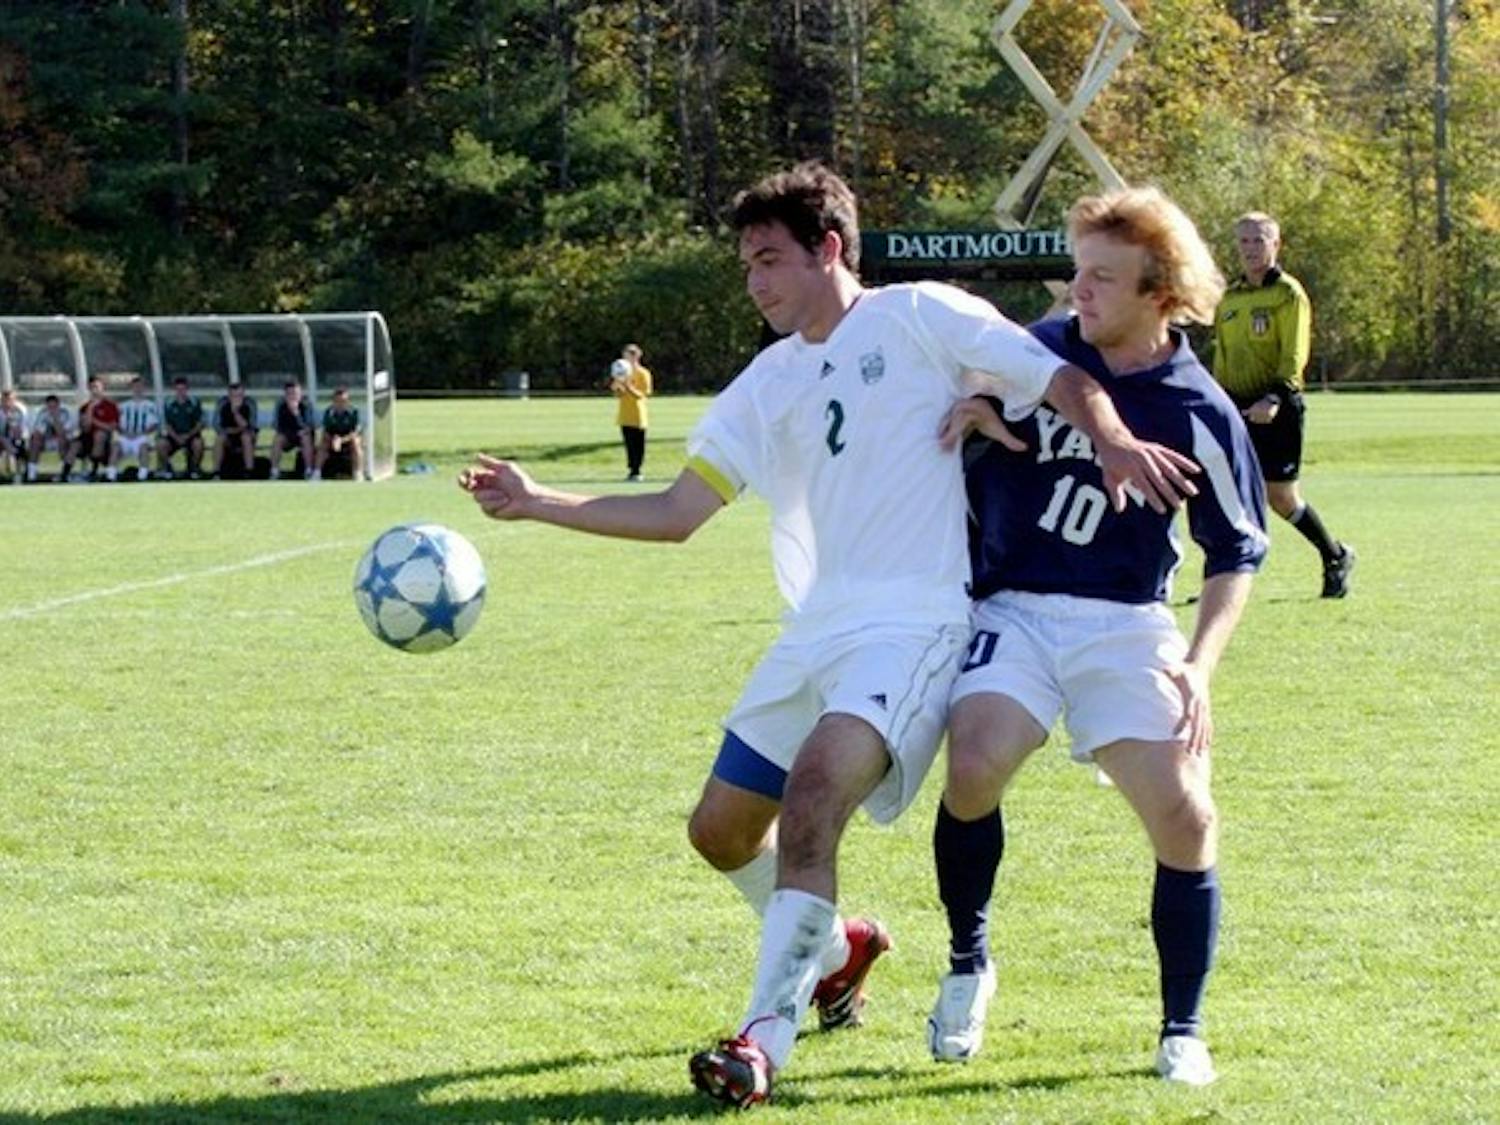 Men's soccer won an overtime nailbiter against Yale that kept the Big Green in the Ivy League title hunt.